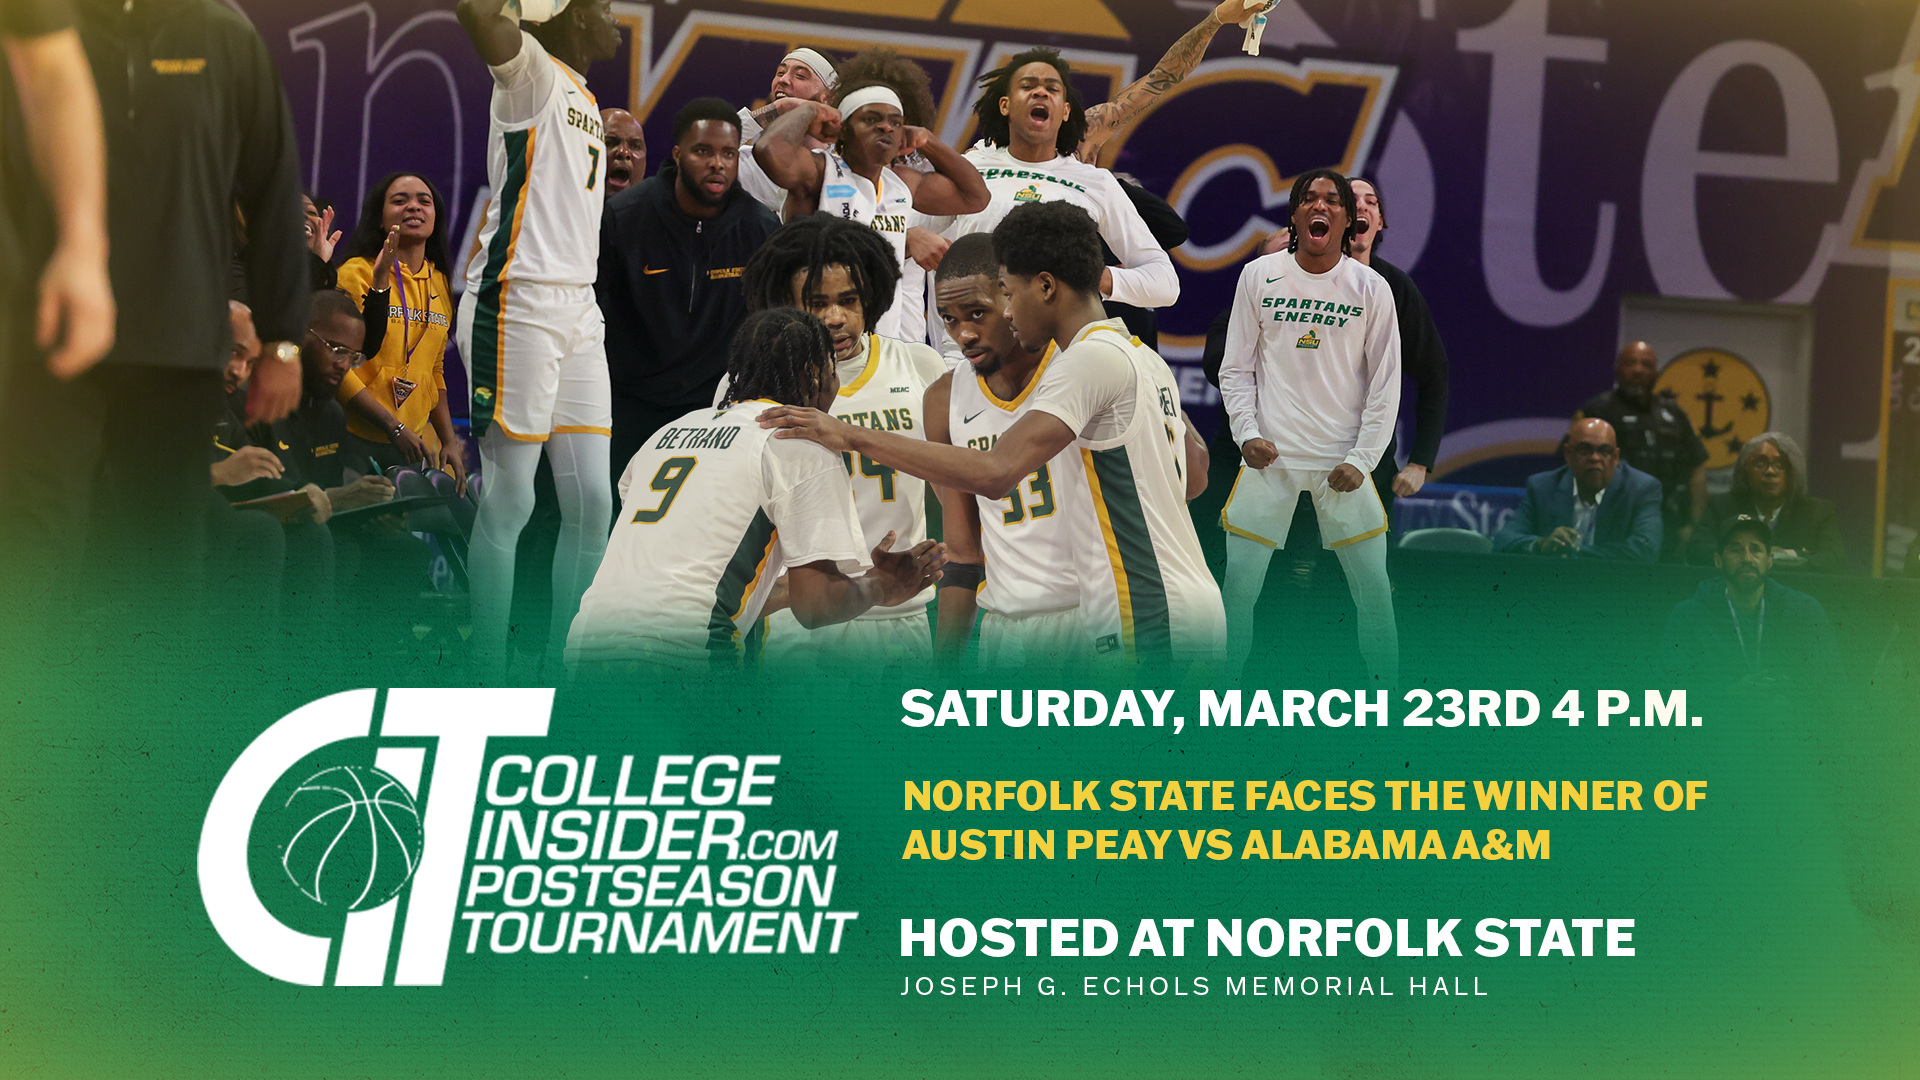 Saturday, March 23rd 4 P.M. Norfolk State Faces the Winner of Austin Peay vs Alabama A&M Hosted at Norfolk State Joseph G. Echols Memorial Hall